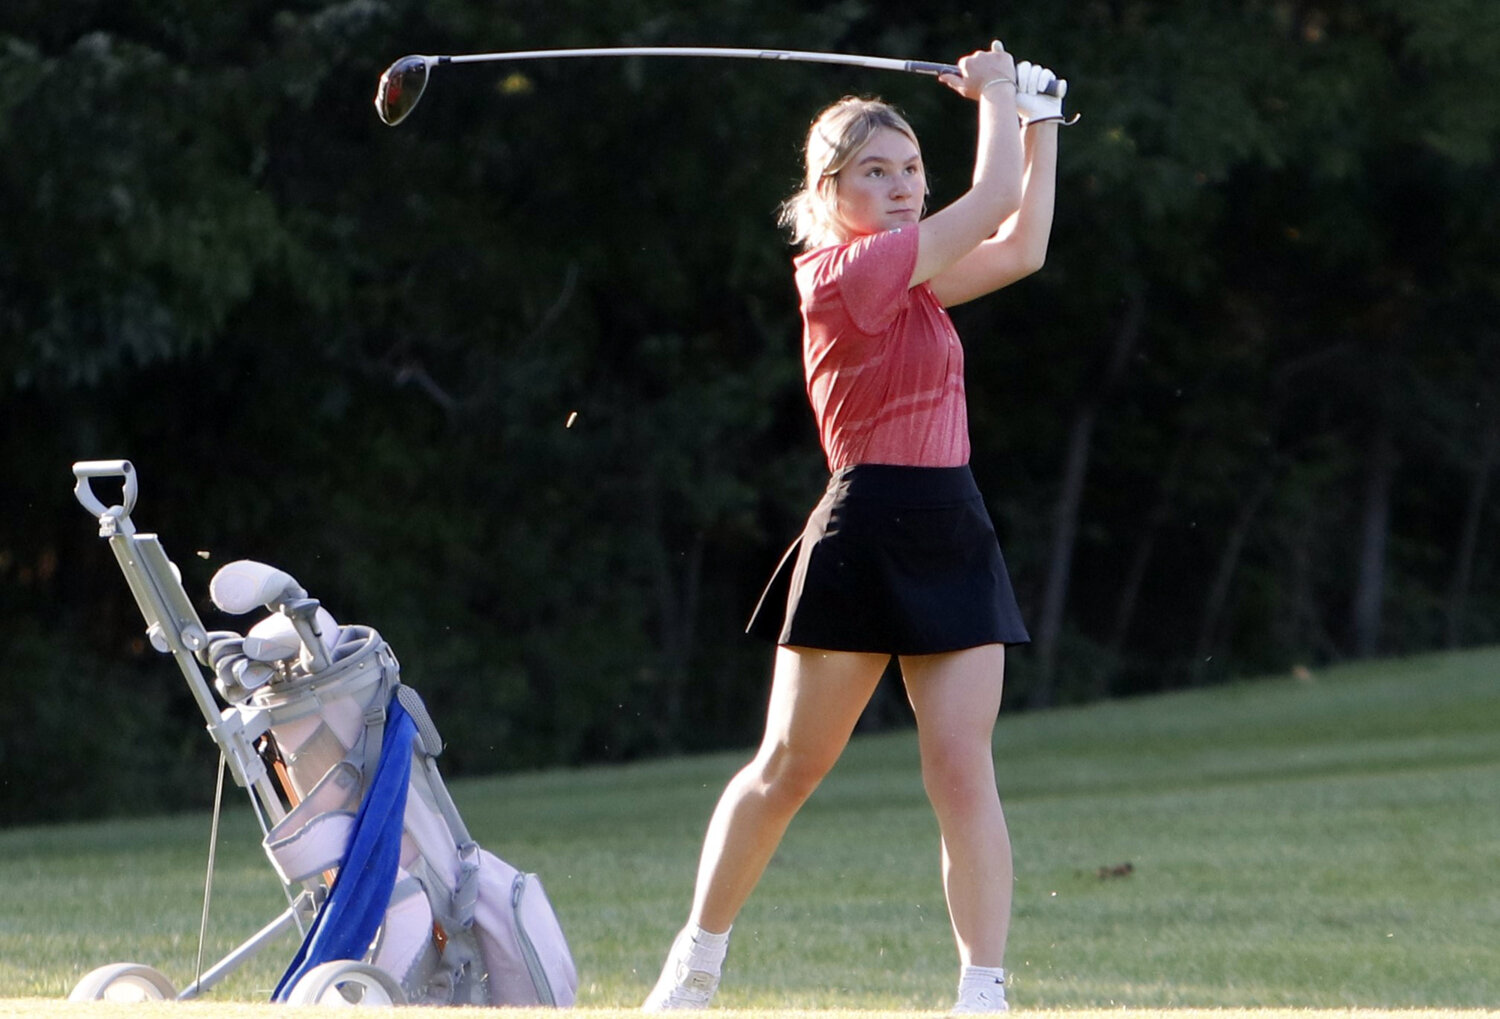 Jenna Marschel watches after hitting a tee shot at the No. 6 hole at Innsbrook Golf Course.